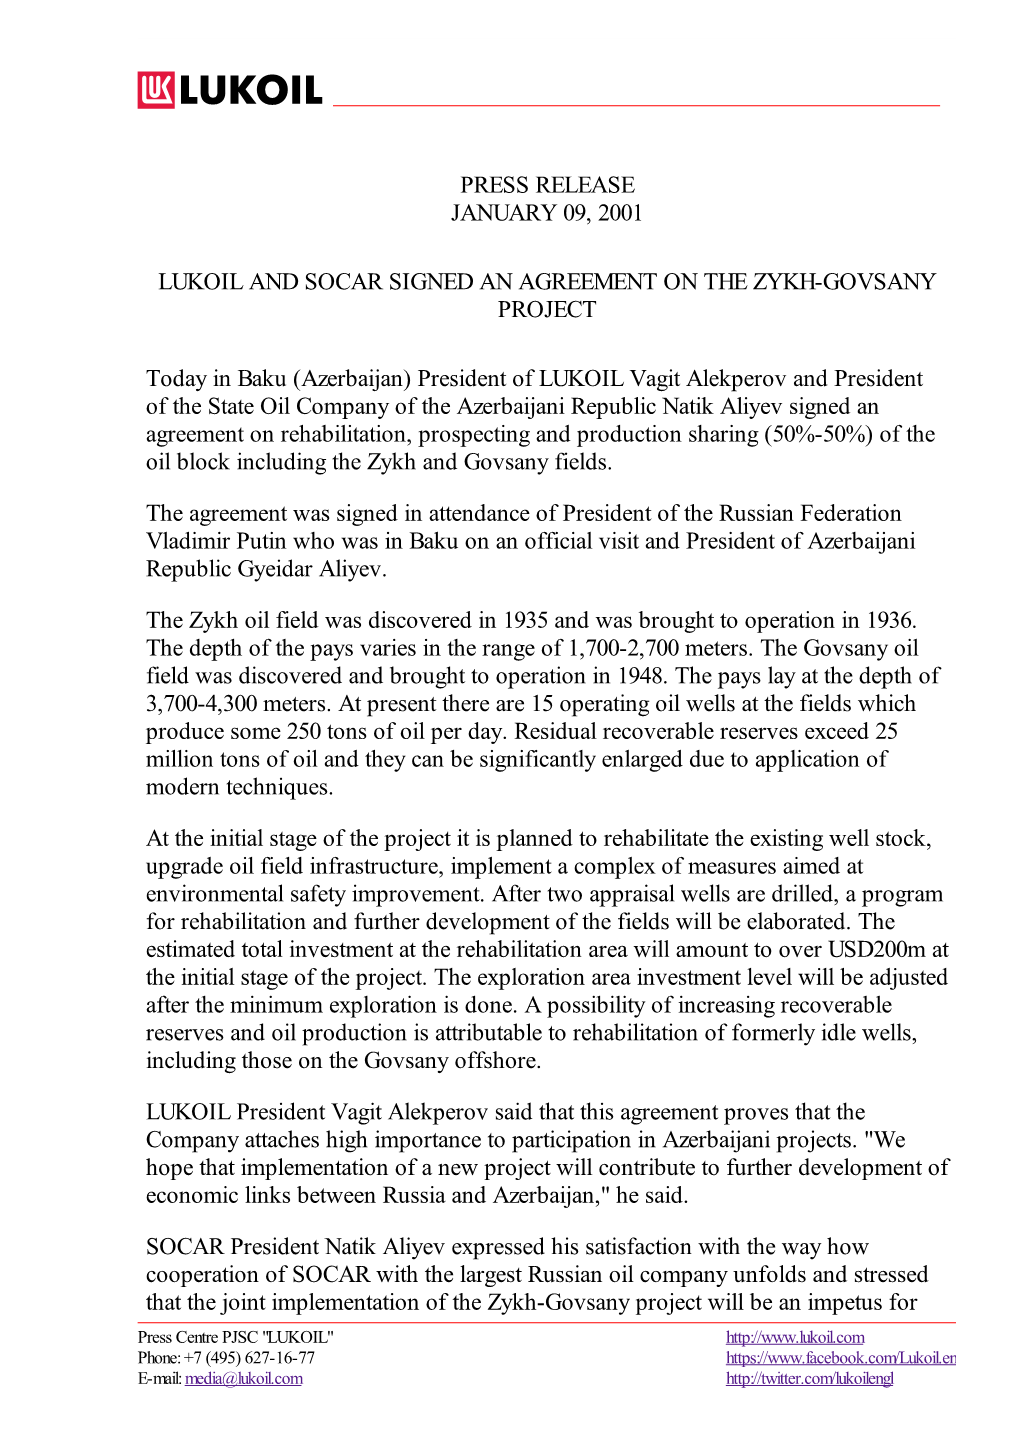 Press Release January 09, 2001 Lukoil and Socar